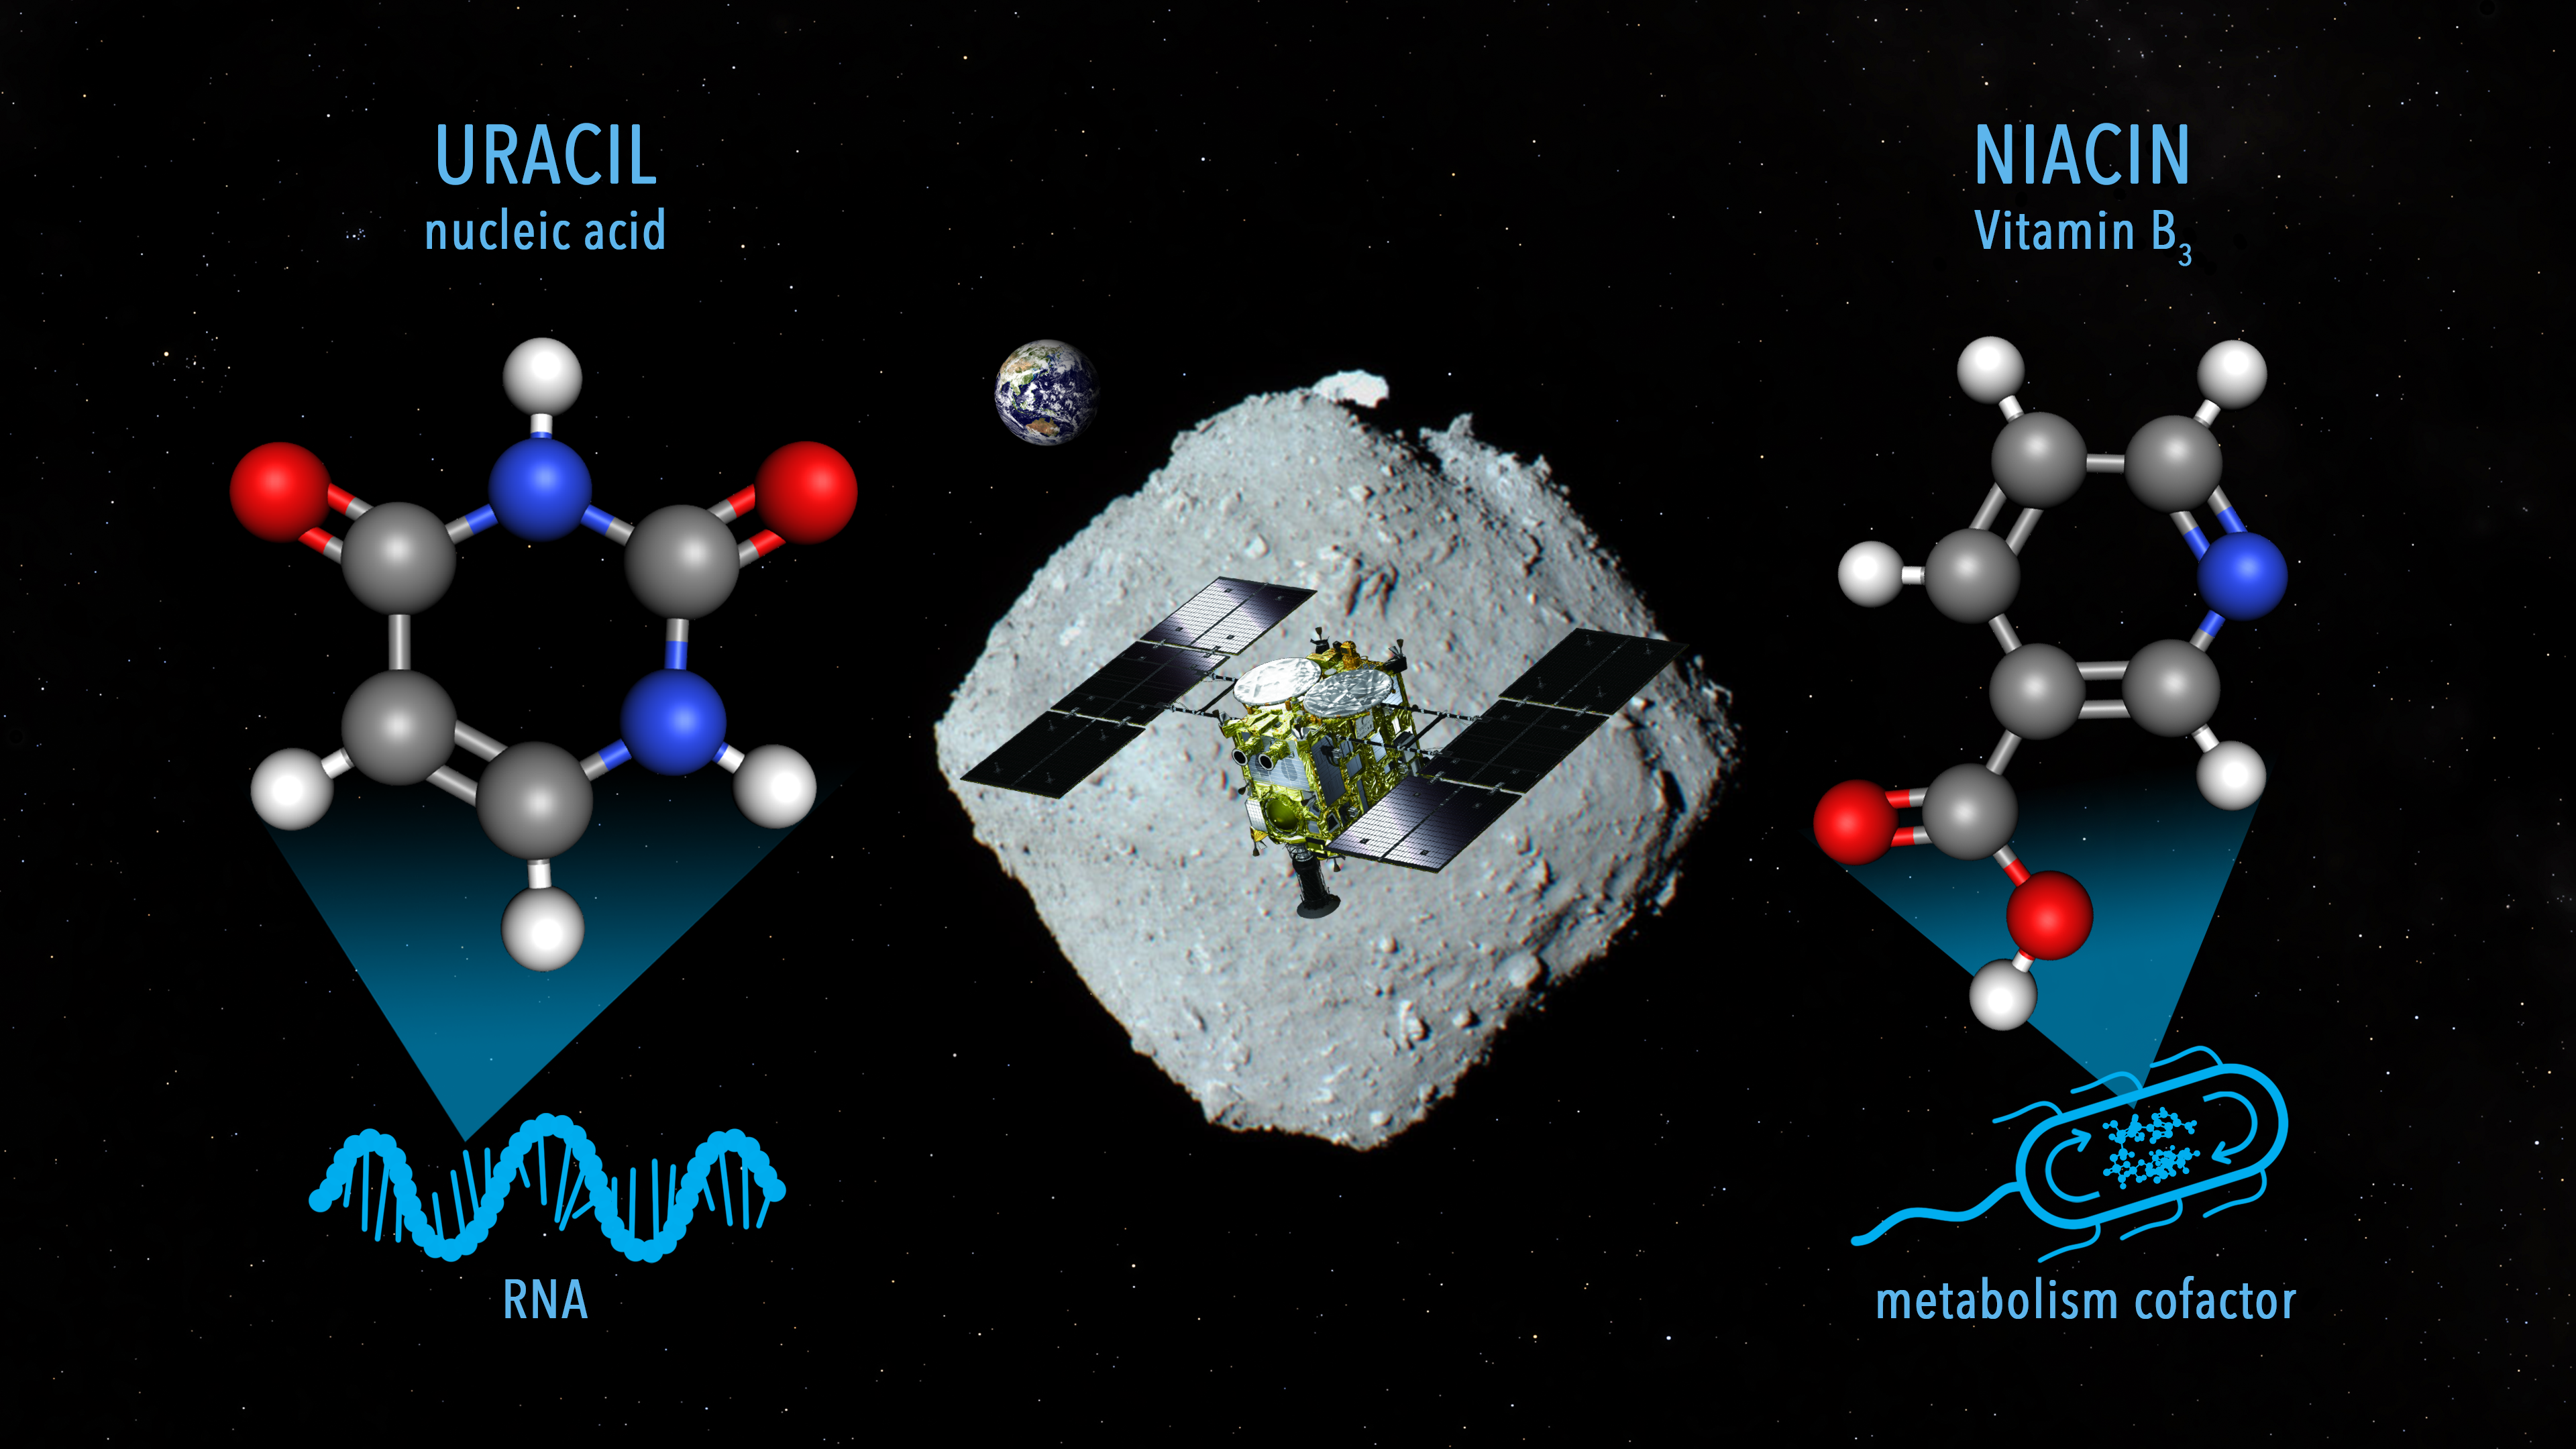 Sampling materials containing uracil and vitamin B3 on the asteroid Ryugu by the Hayabusa2 spacecraft